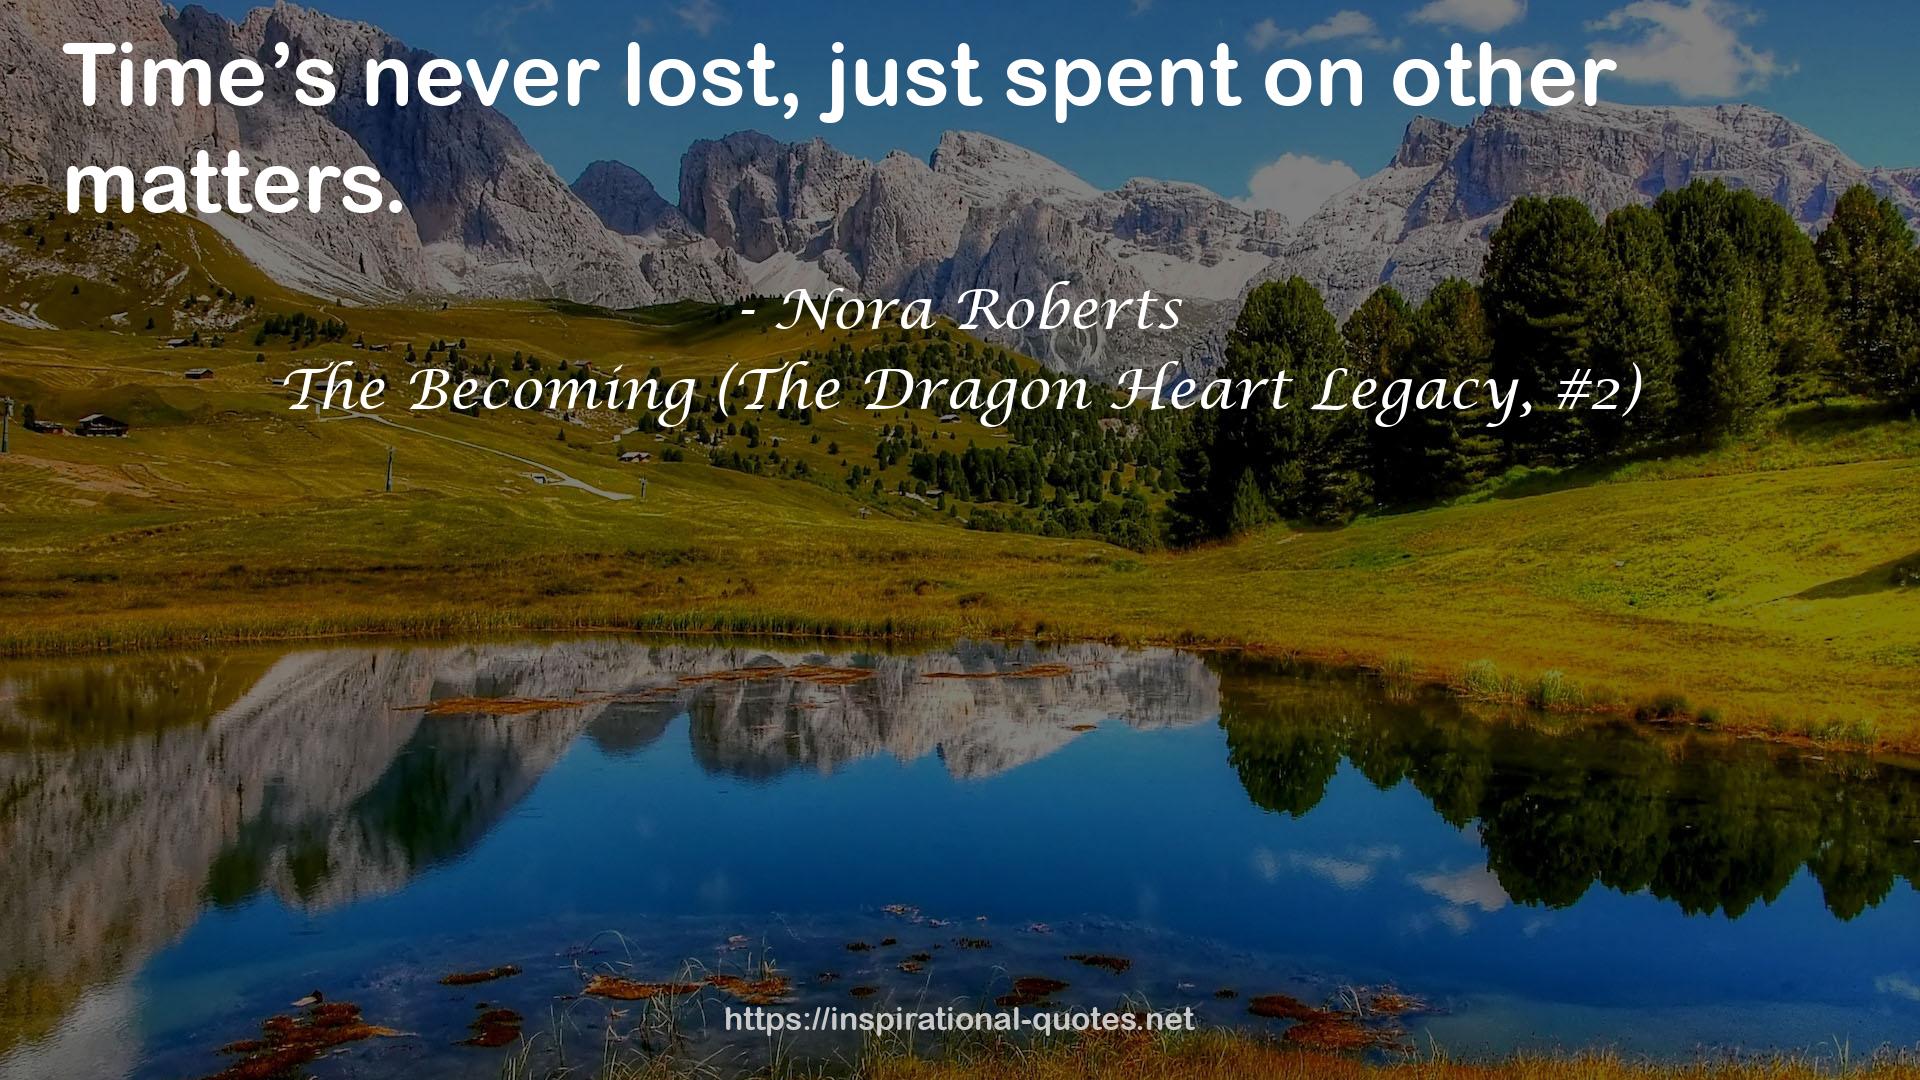 The Becoming (The Dragon Heart Legacy, #2) QUOTES